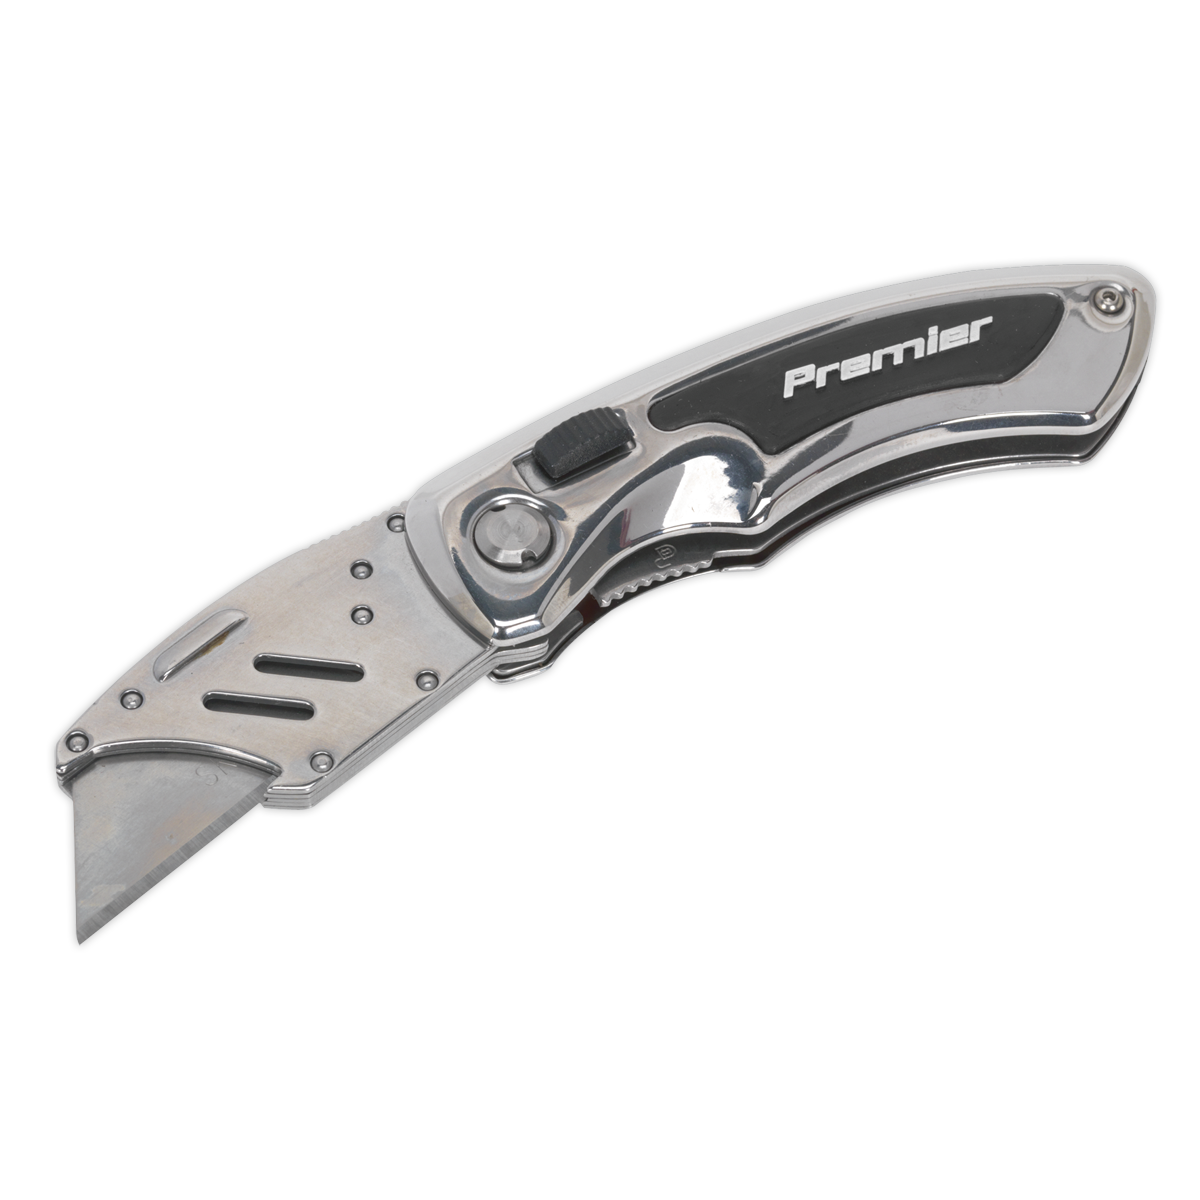 Sealey Locking Pocket Knife with Quick Change Blade PK23 | High quality mirror polished stainless steel handle and blade holder, fitted with positive lock to prevent folding whilst in use. | toolforce.ie